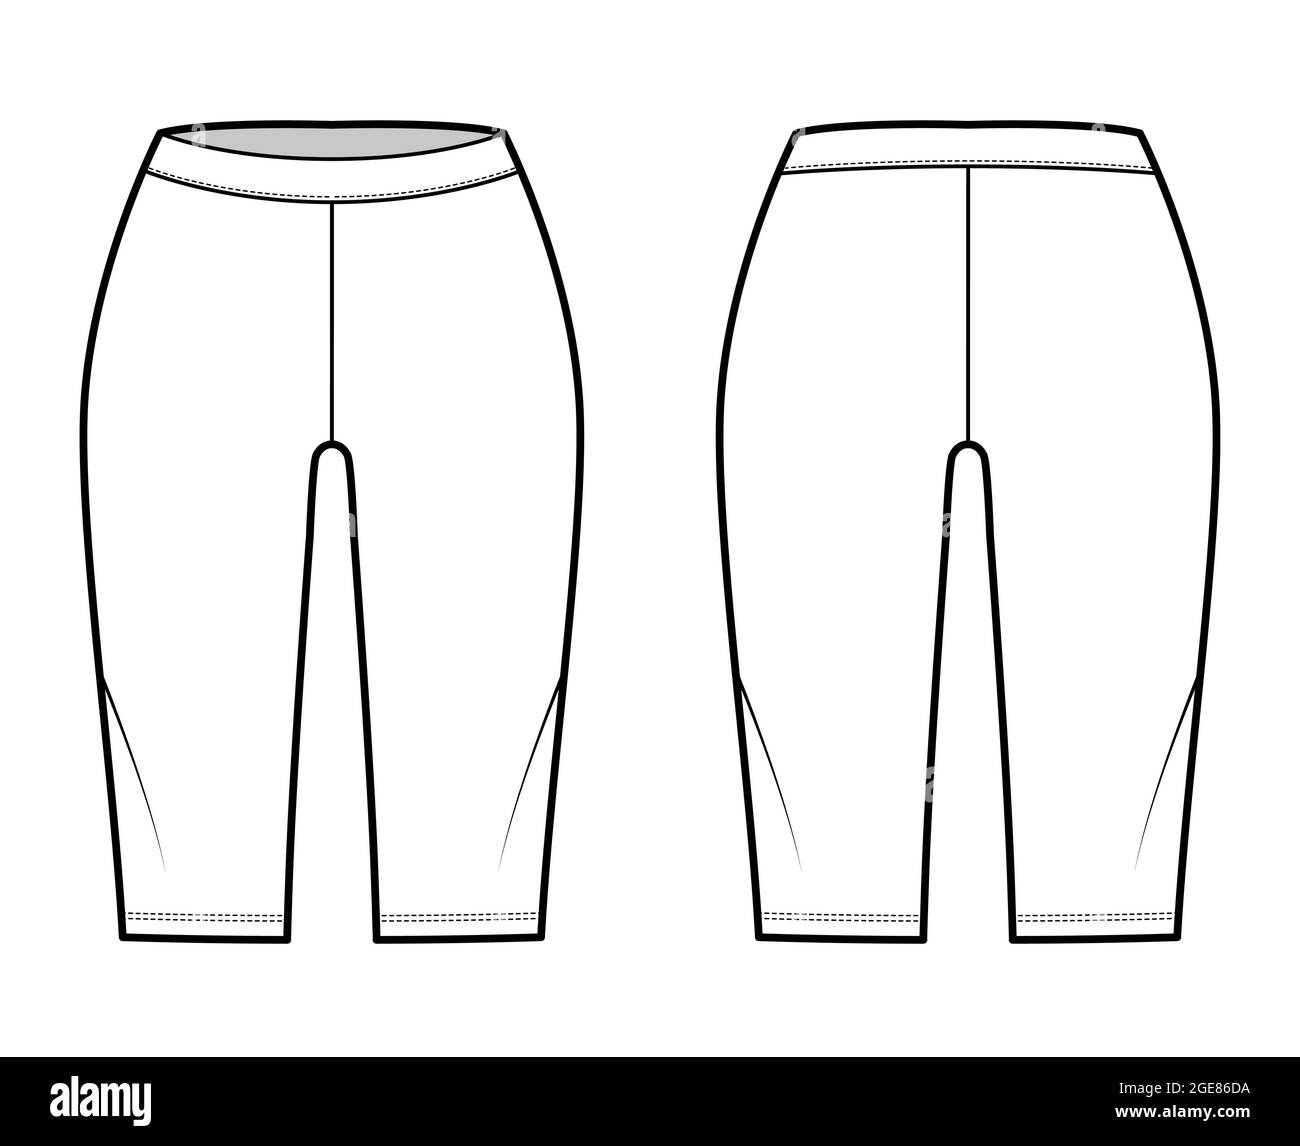 Bike shorts Leggings technical fashion illustration with low waist, rise, knee length. Flat sport training pants, casual knit trousers apparel template front, back, white color. Women, men CAD mockup Stock Vector